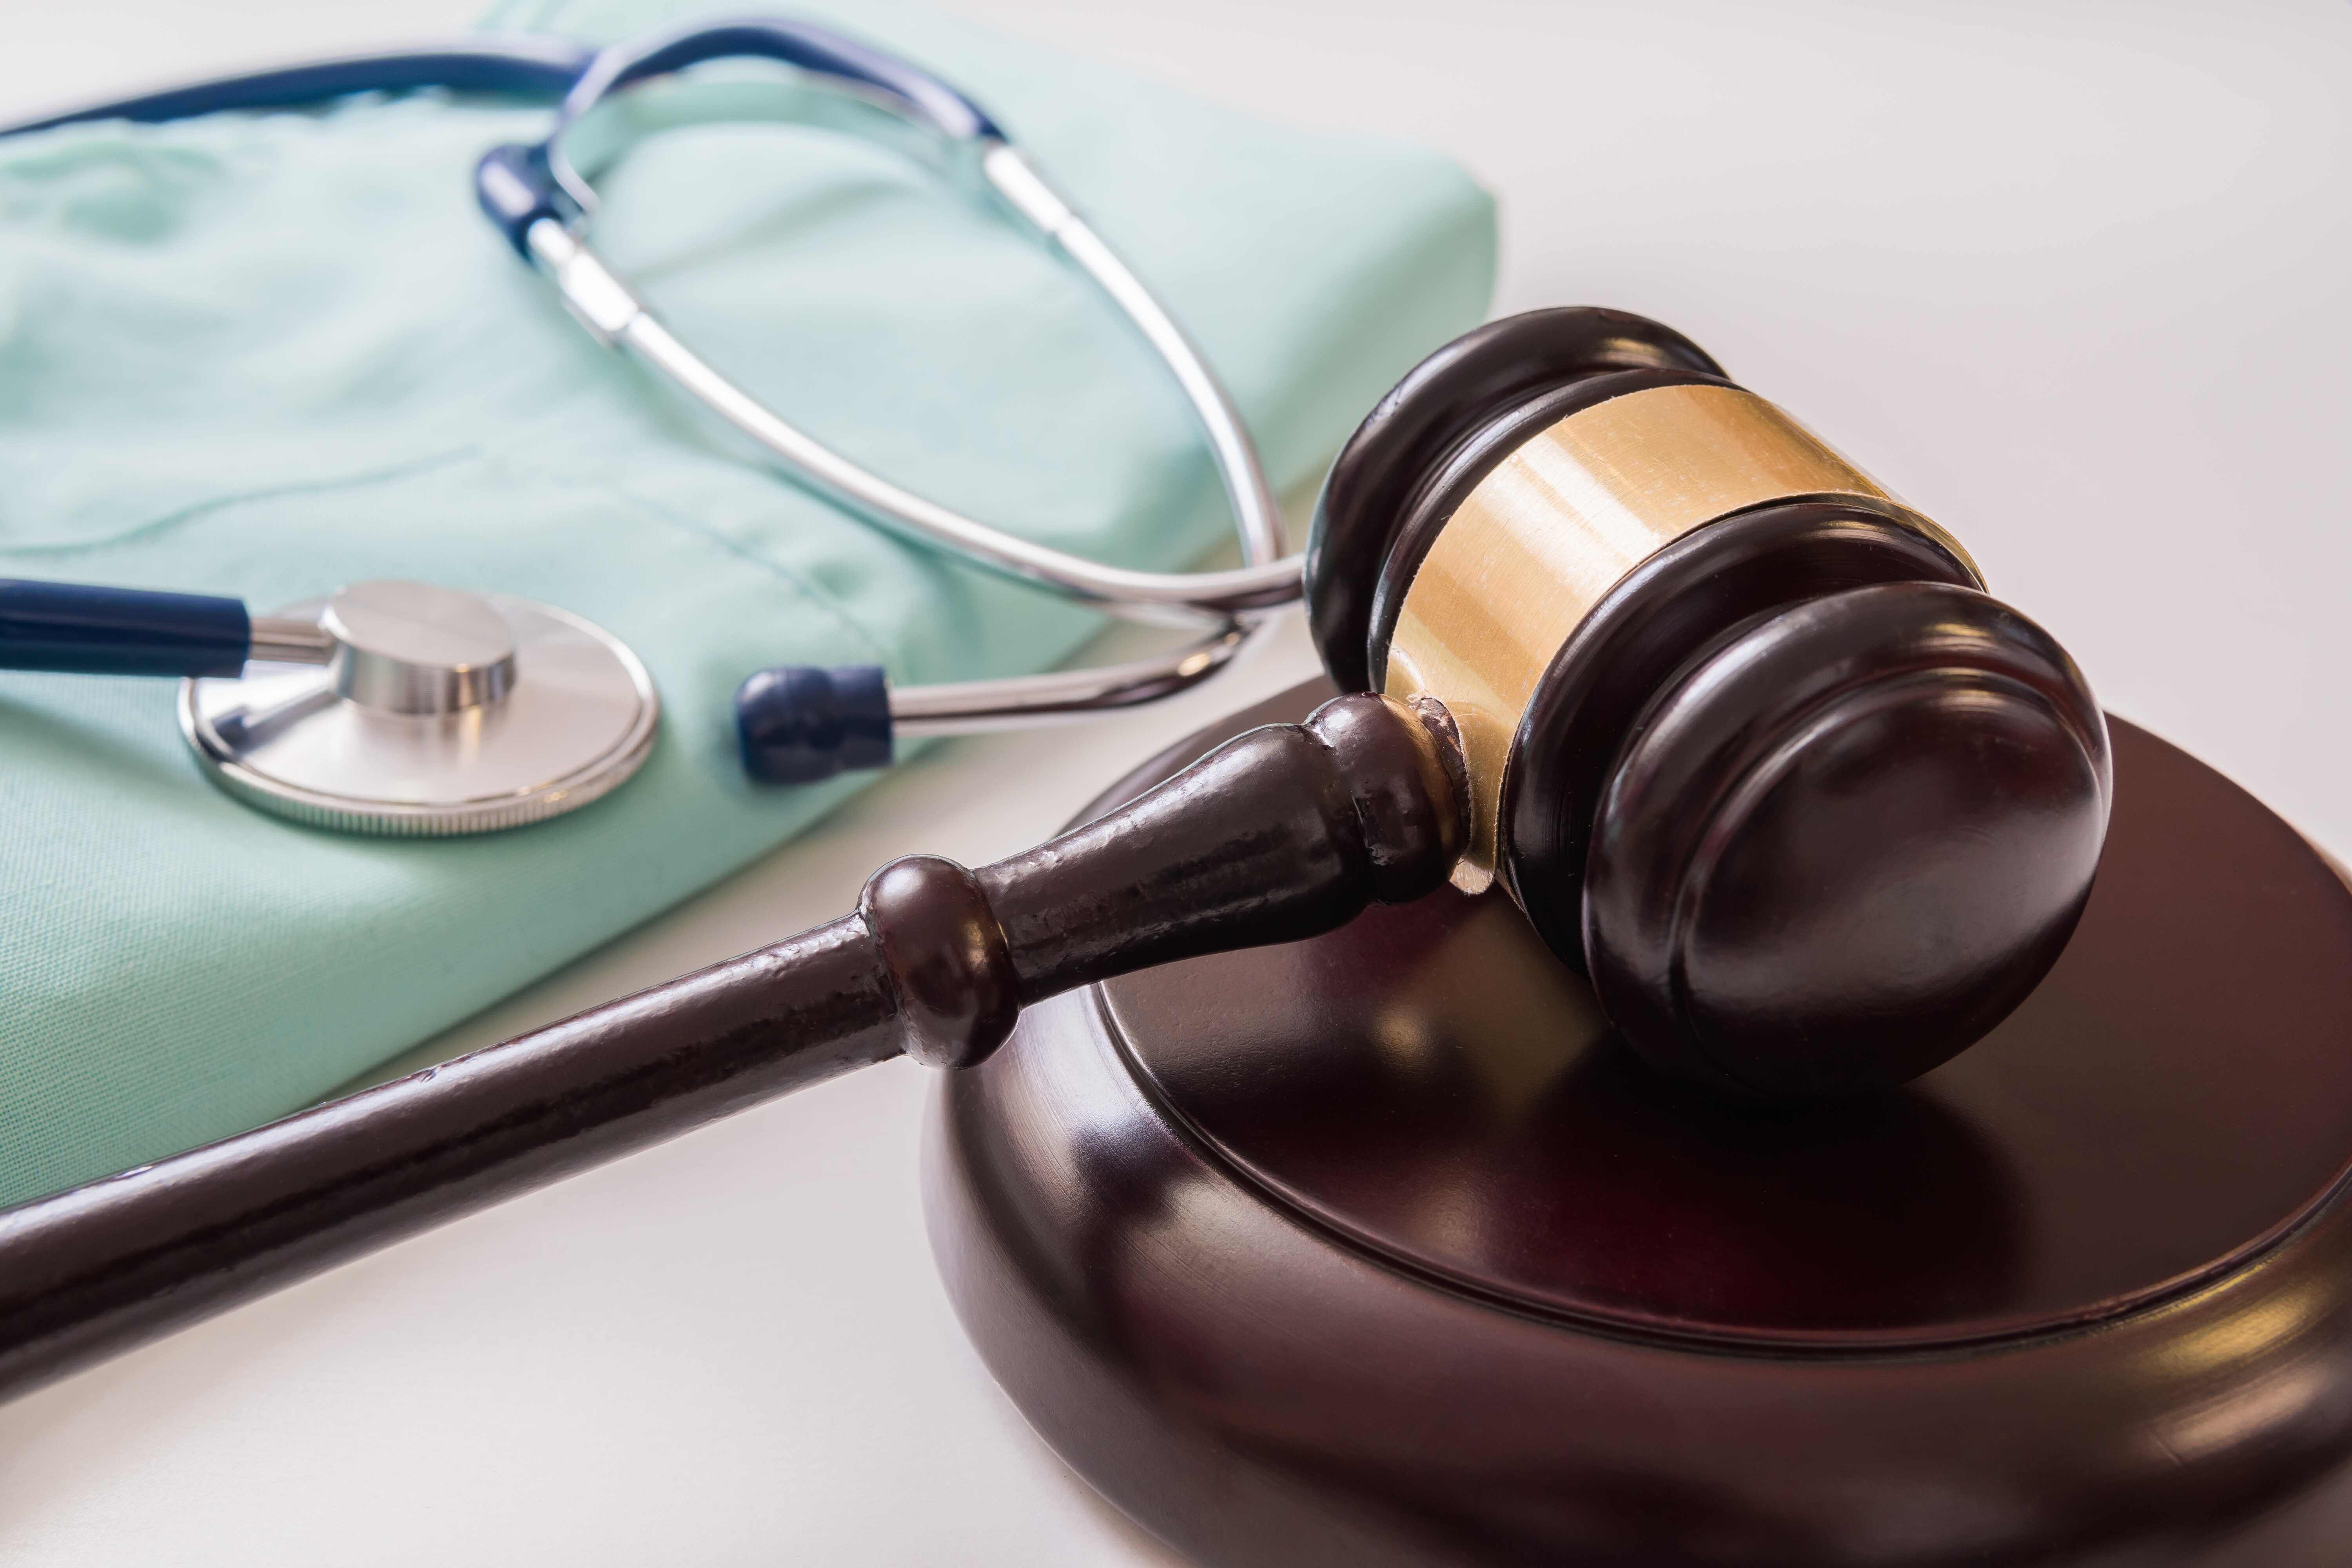 Medical scrubs and stethoscope next to a gavel